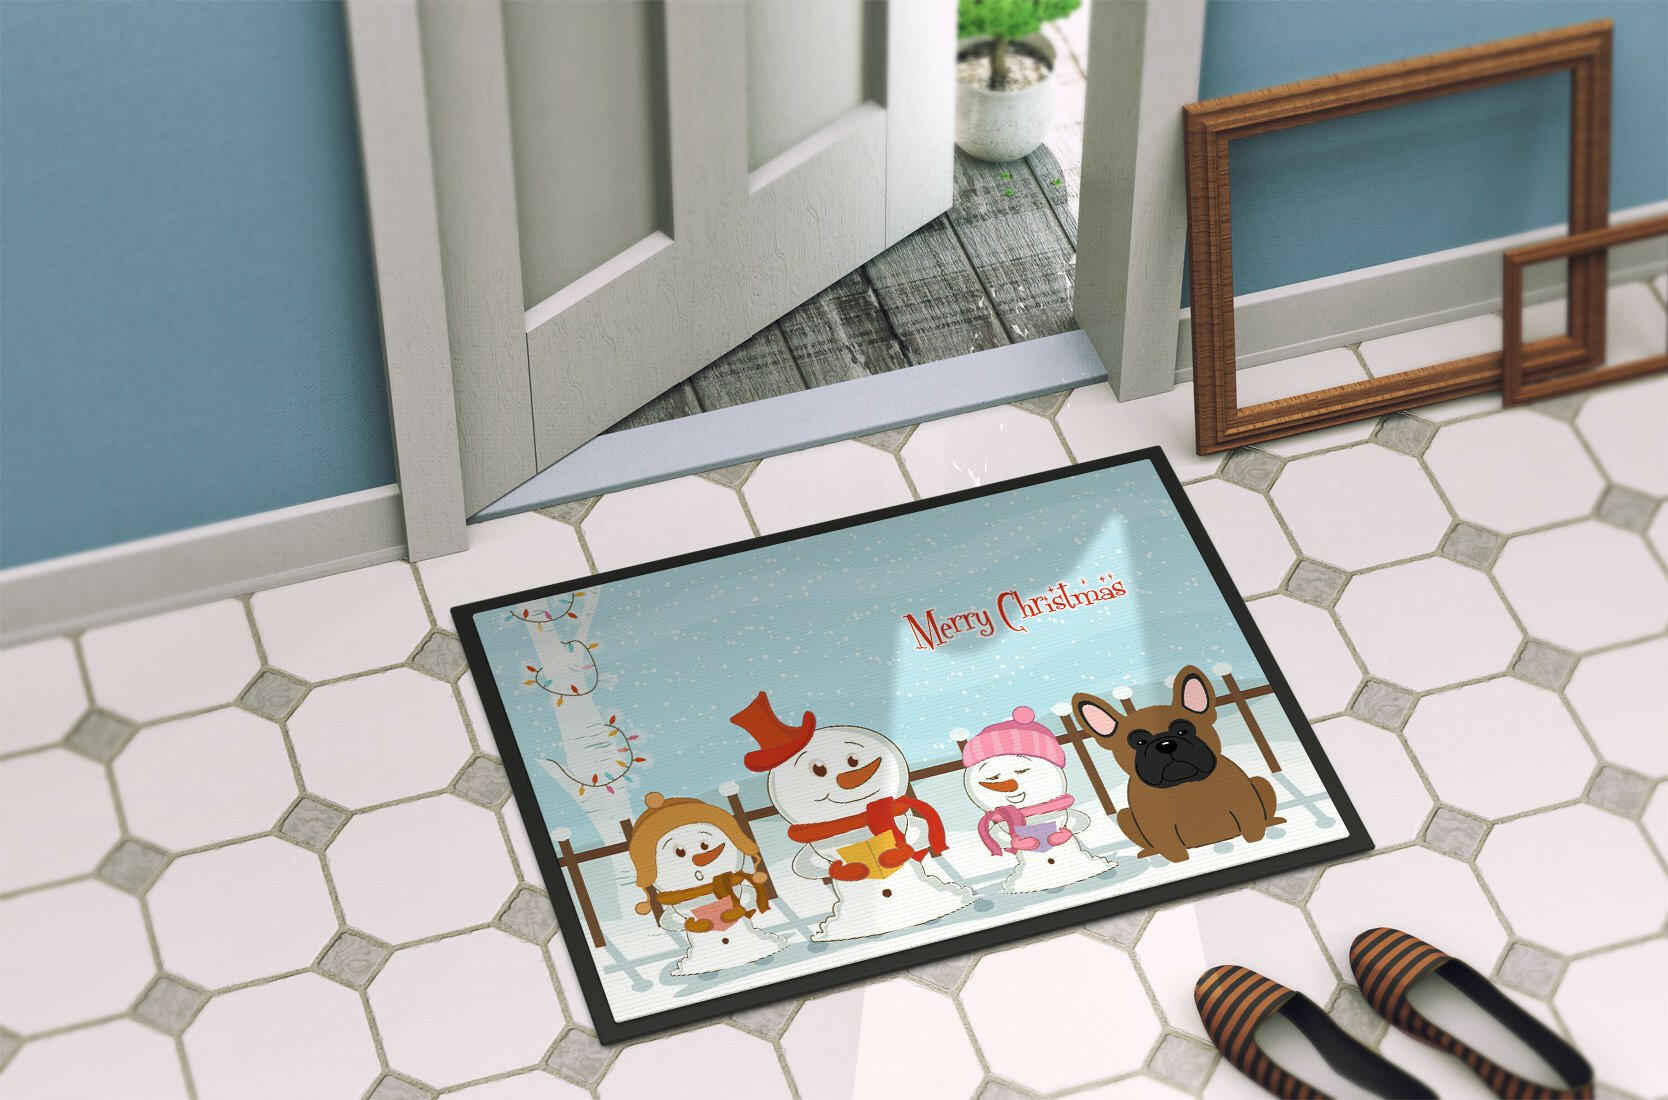 Merry Christmas Carolers French Bulldog Brown Indoor or Outdoor Mat 24x36 BB2344JMAT - the-store.com